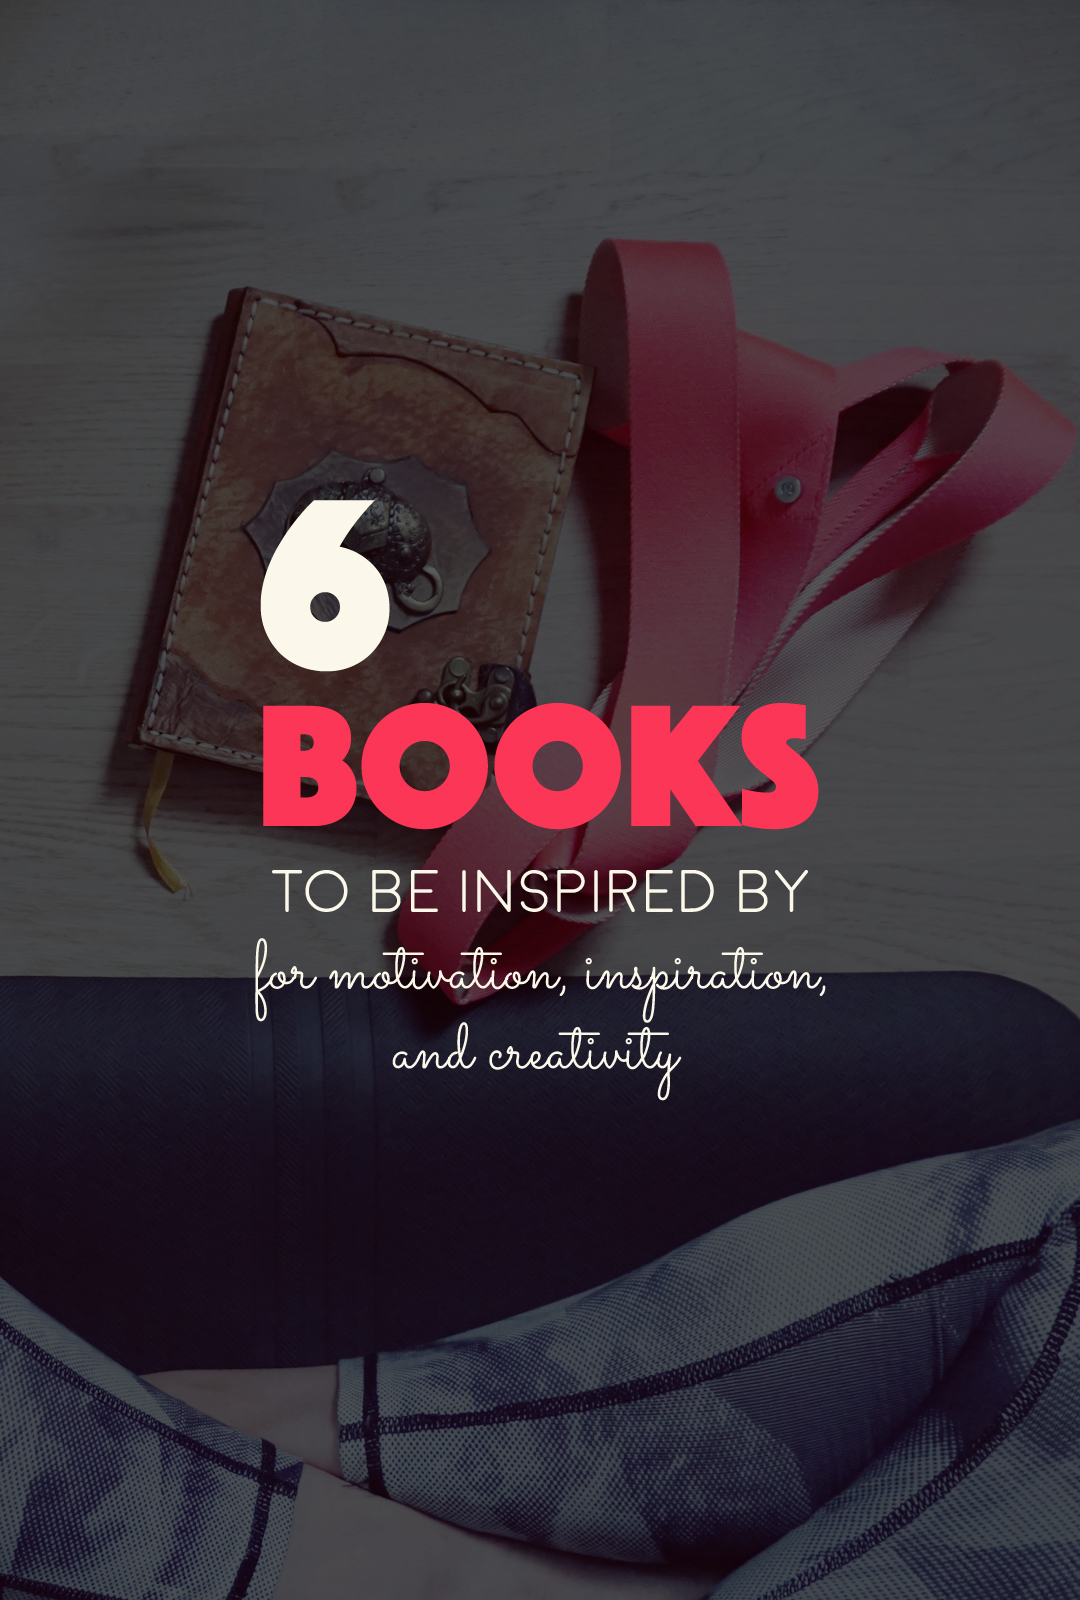 6 Books to Be Inspired By | http://BananaBloom.com #inspiration #dreams #books